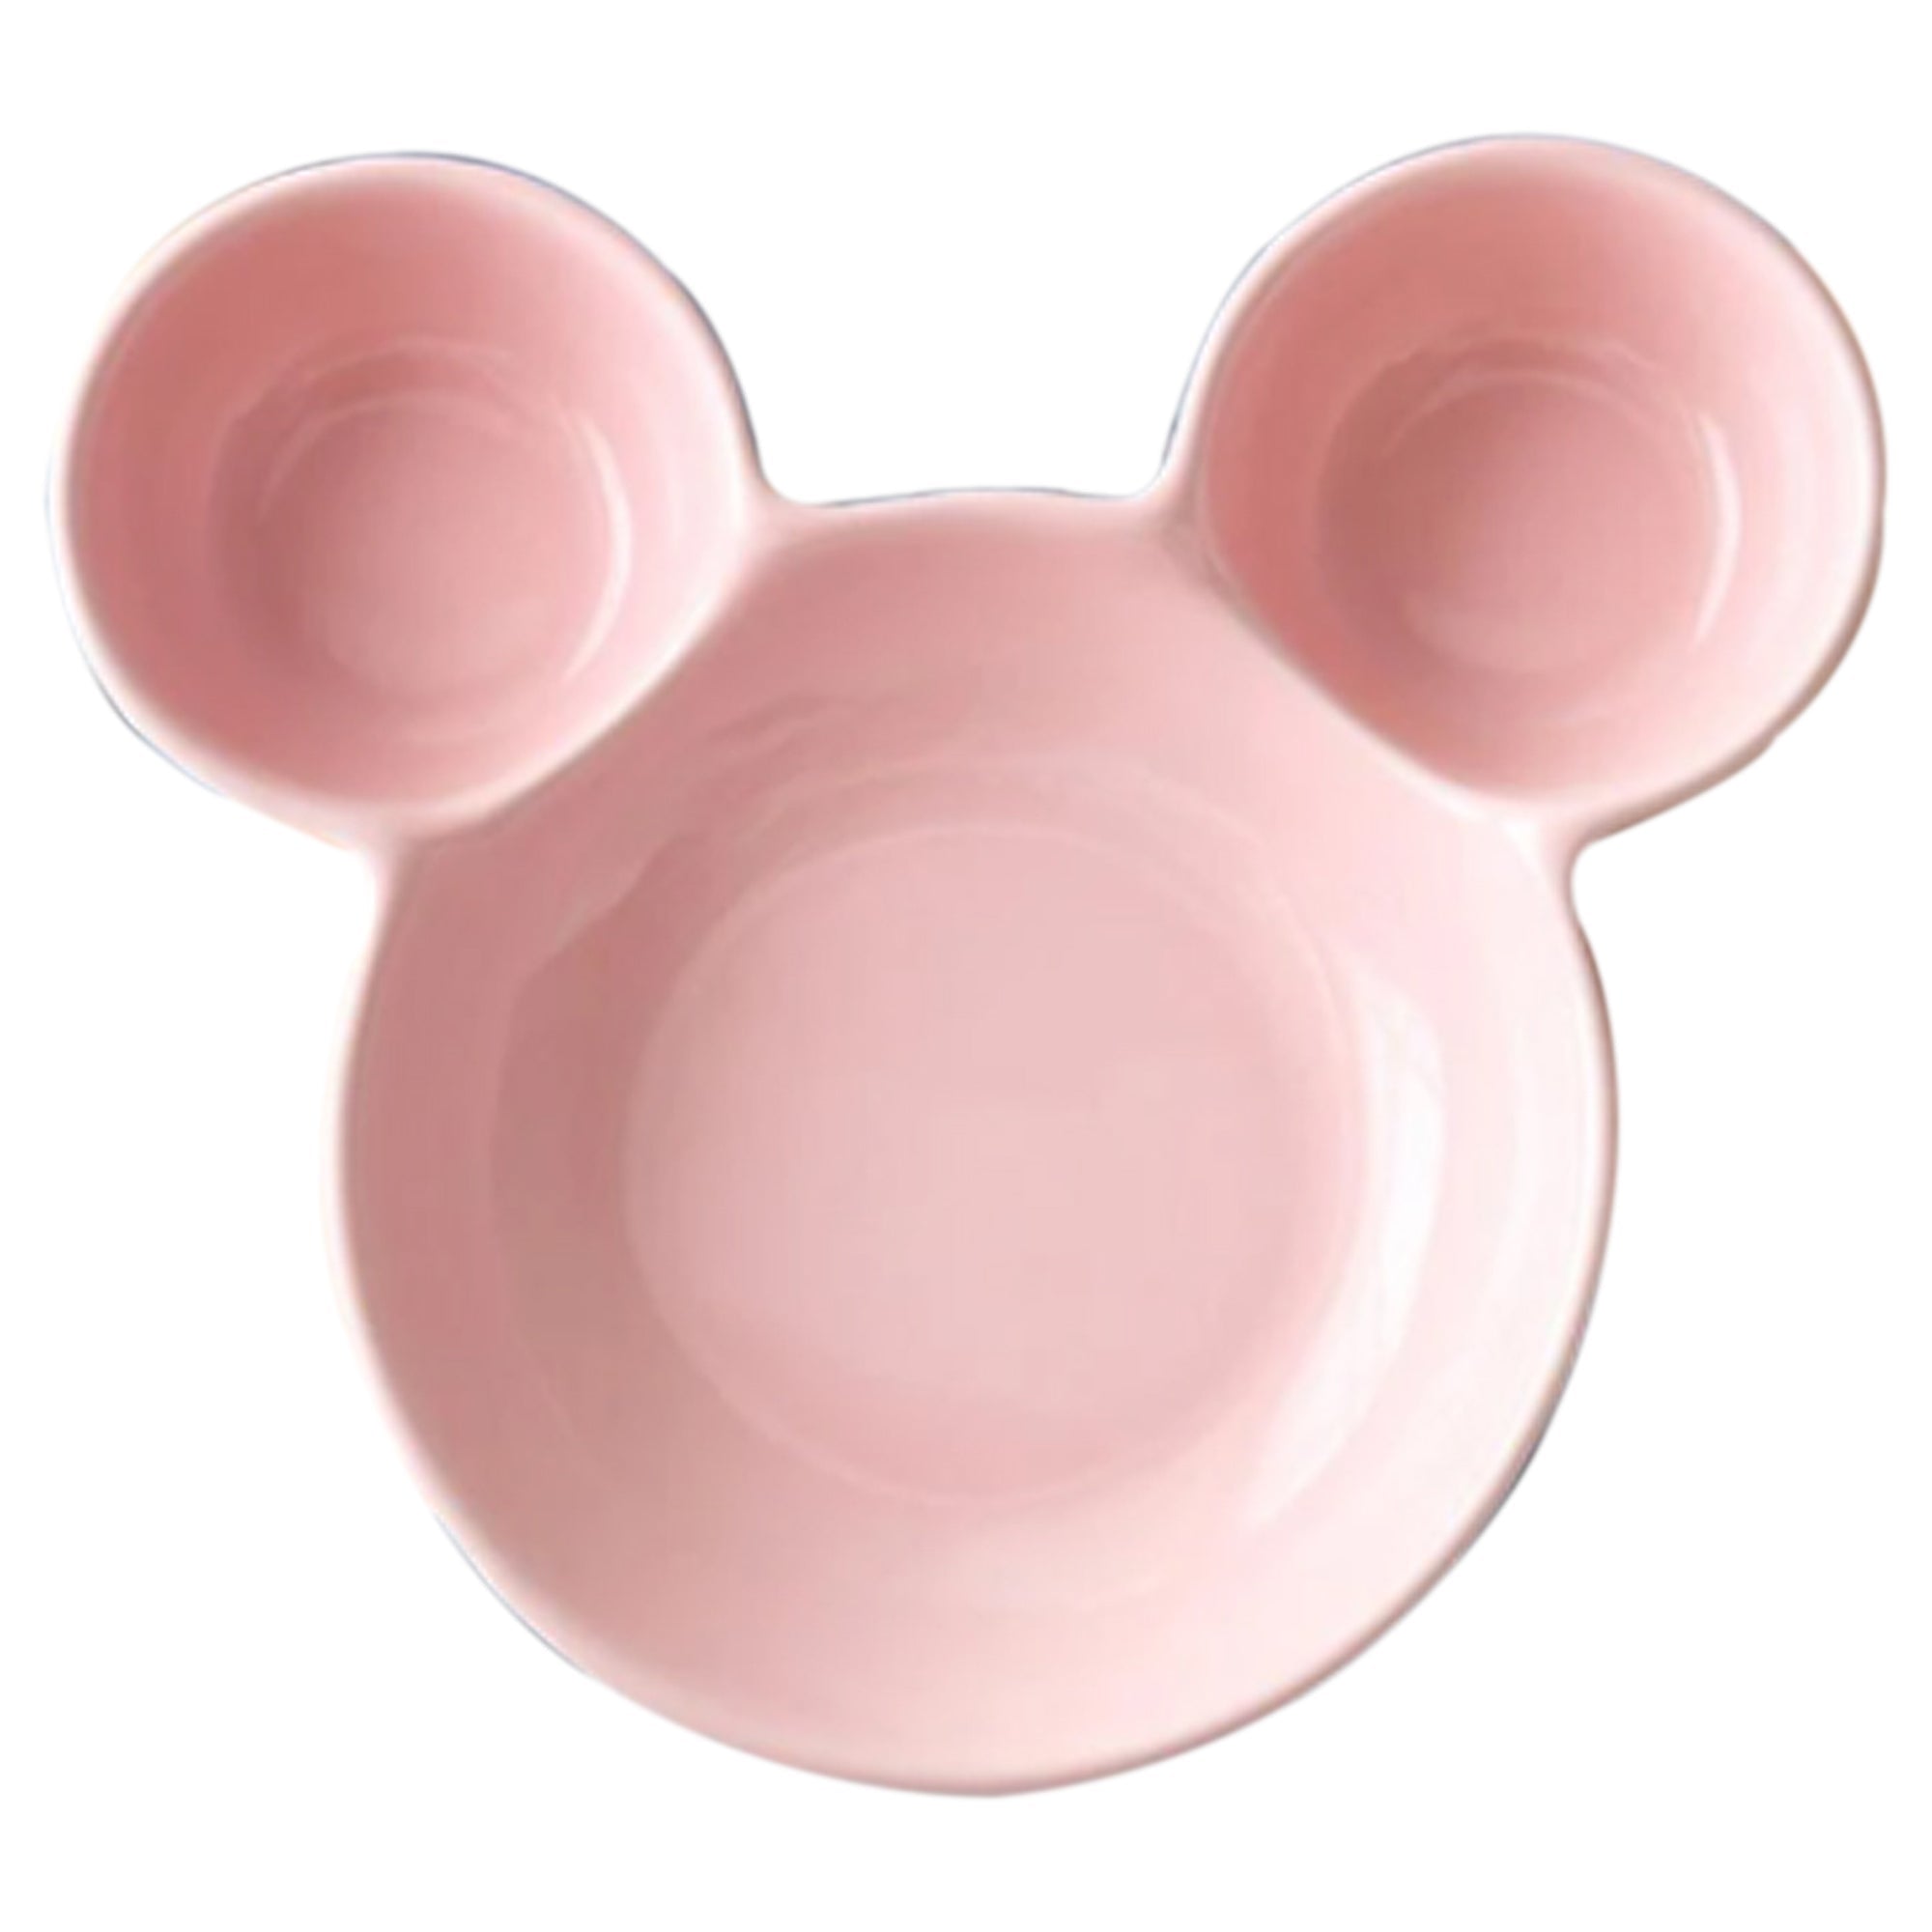 0863A Unbreakable Plastic Mickey Shaped Kids/Snack Serving Plate (Without Sticker)